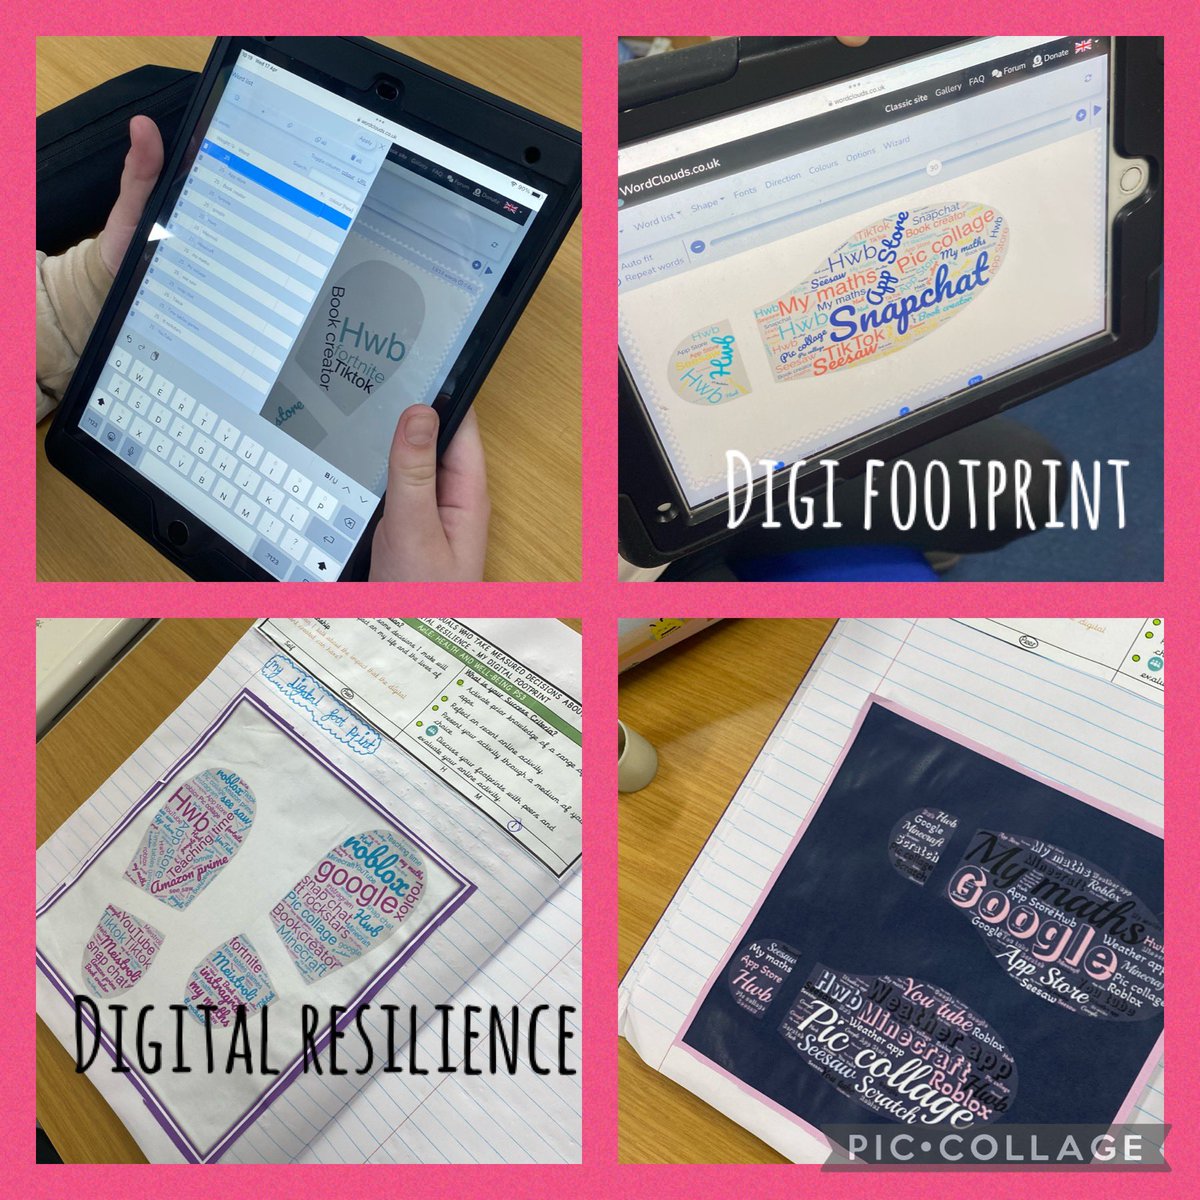 Some fine cricket skills on show during PE this week! Also Y5 @PDCSPrimary have been discussing their online activity & used their #digitalskills to create their own ‘digi footprints’. #healthconfidentindividuals #digitalresilience